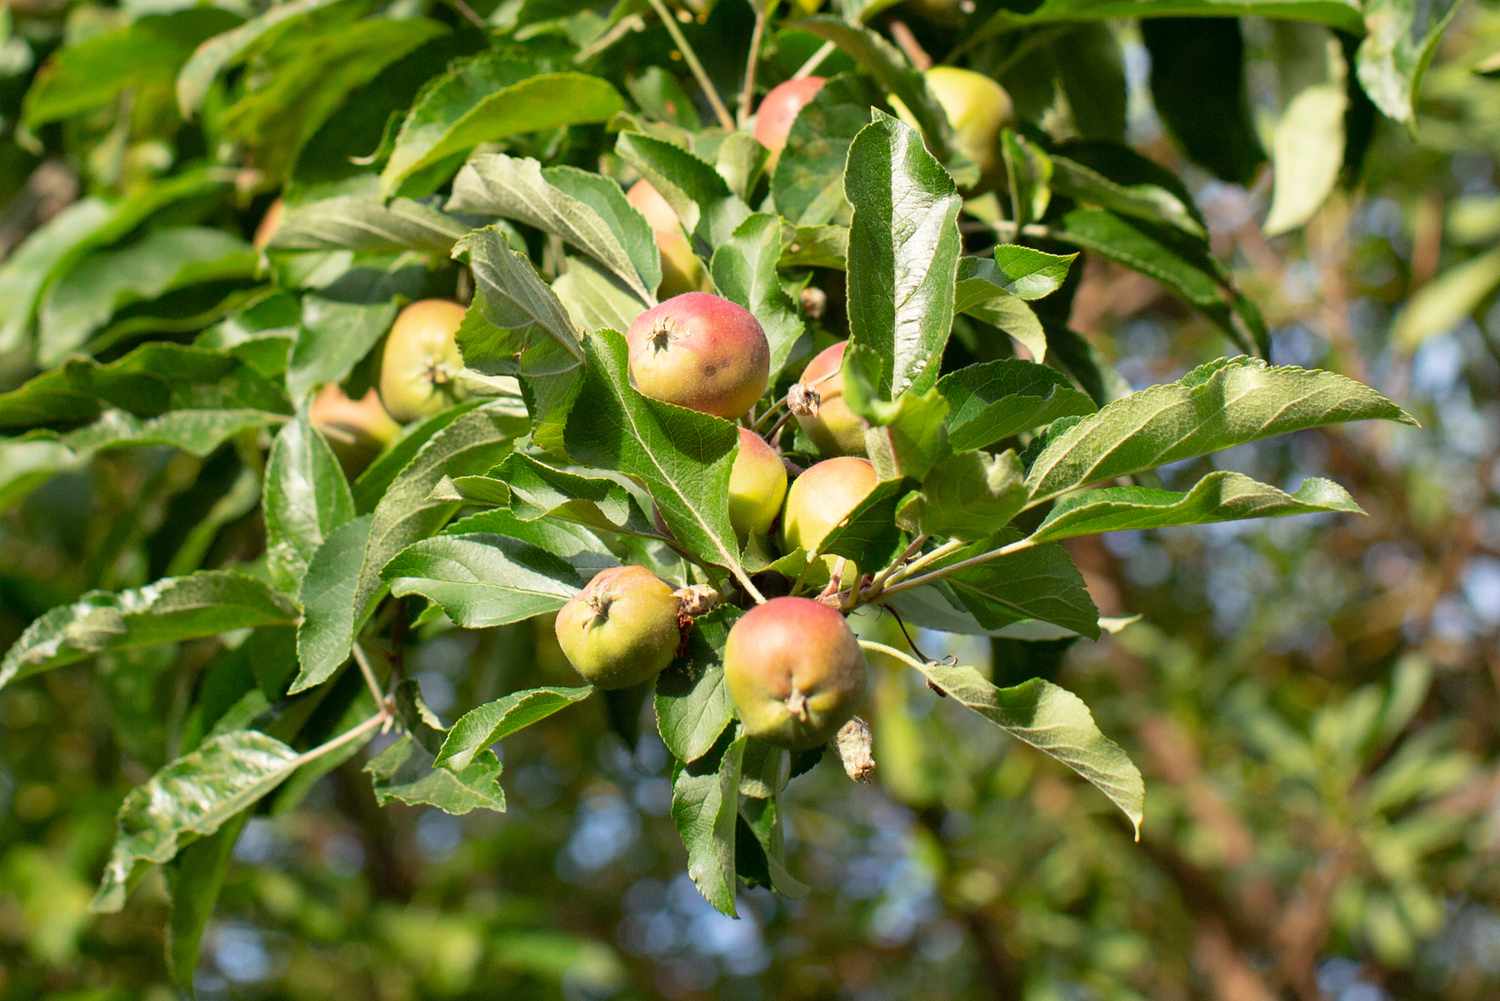 How Long Does It Take For Apple Trees To Produce Fruit